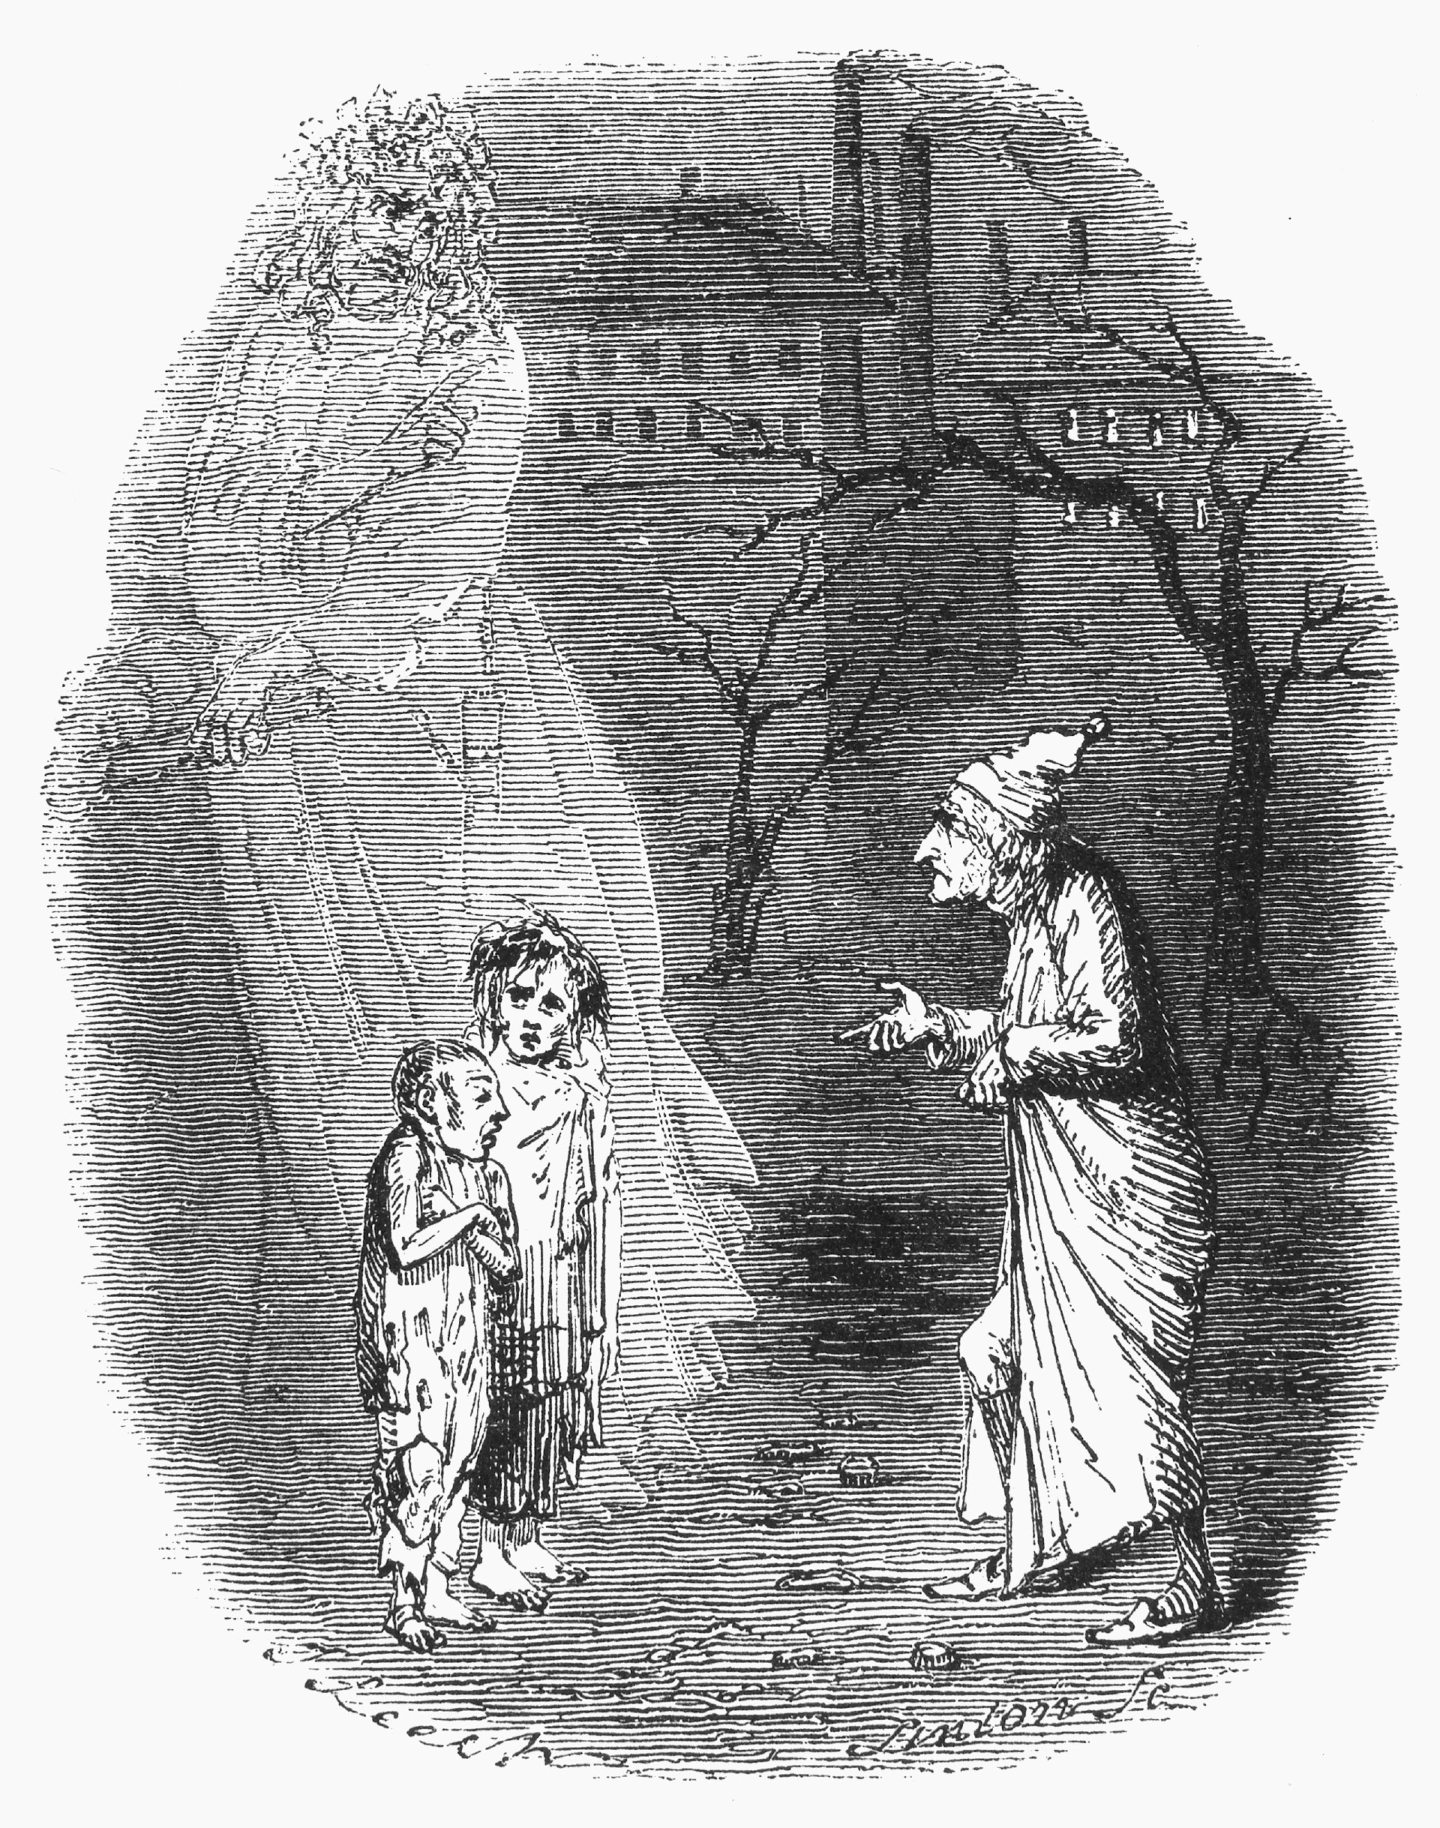 Ignorance And Want, an etching by John Leech from the first edition of Charles Dickens' A Christmas Carol, 1843.